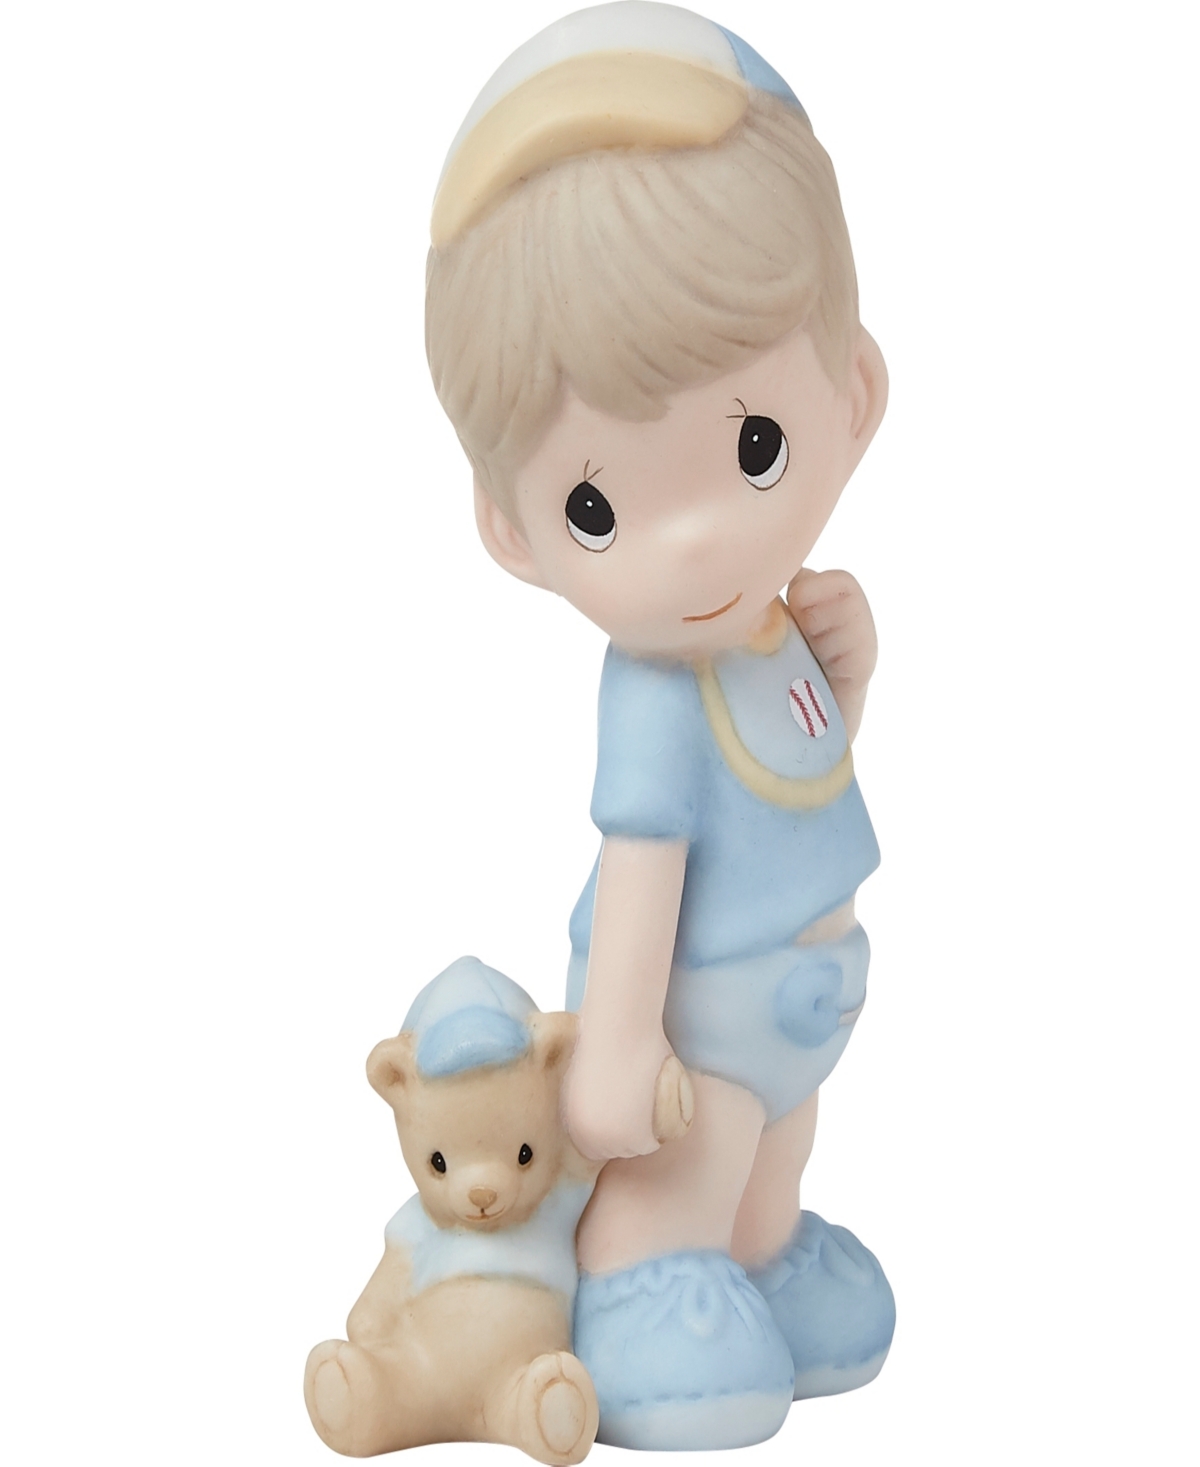 Precious Moments 222019 Oh Boy Bisque Porcelain Figurine In Multicolored